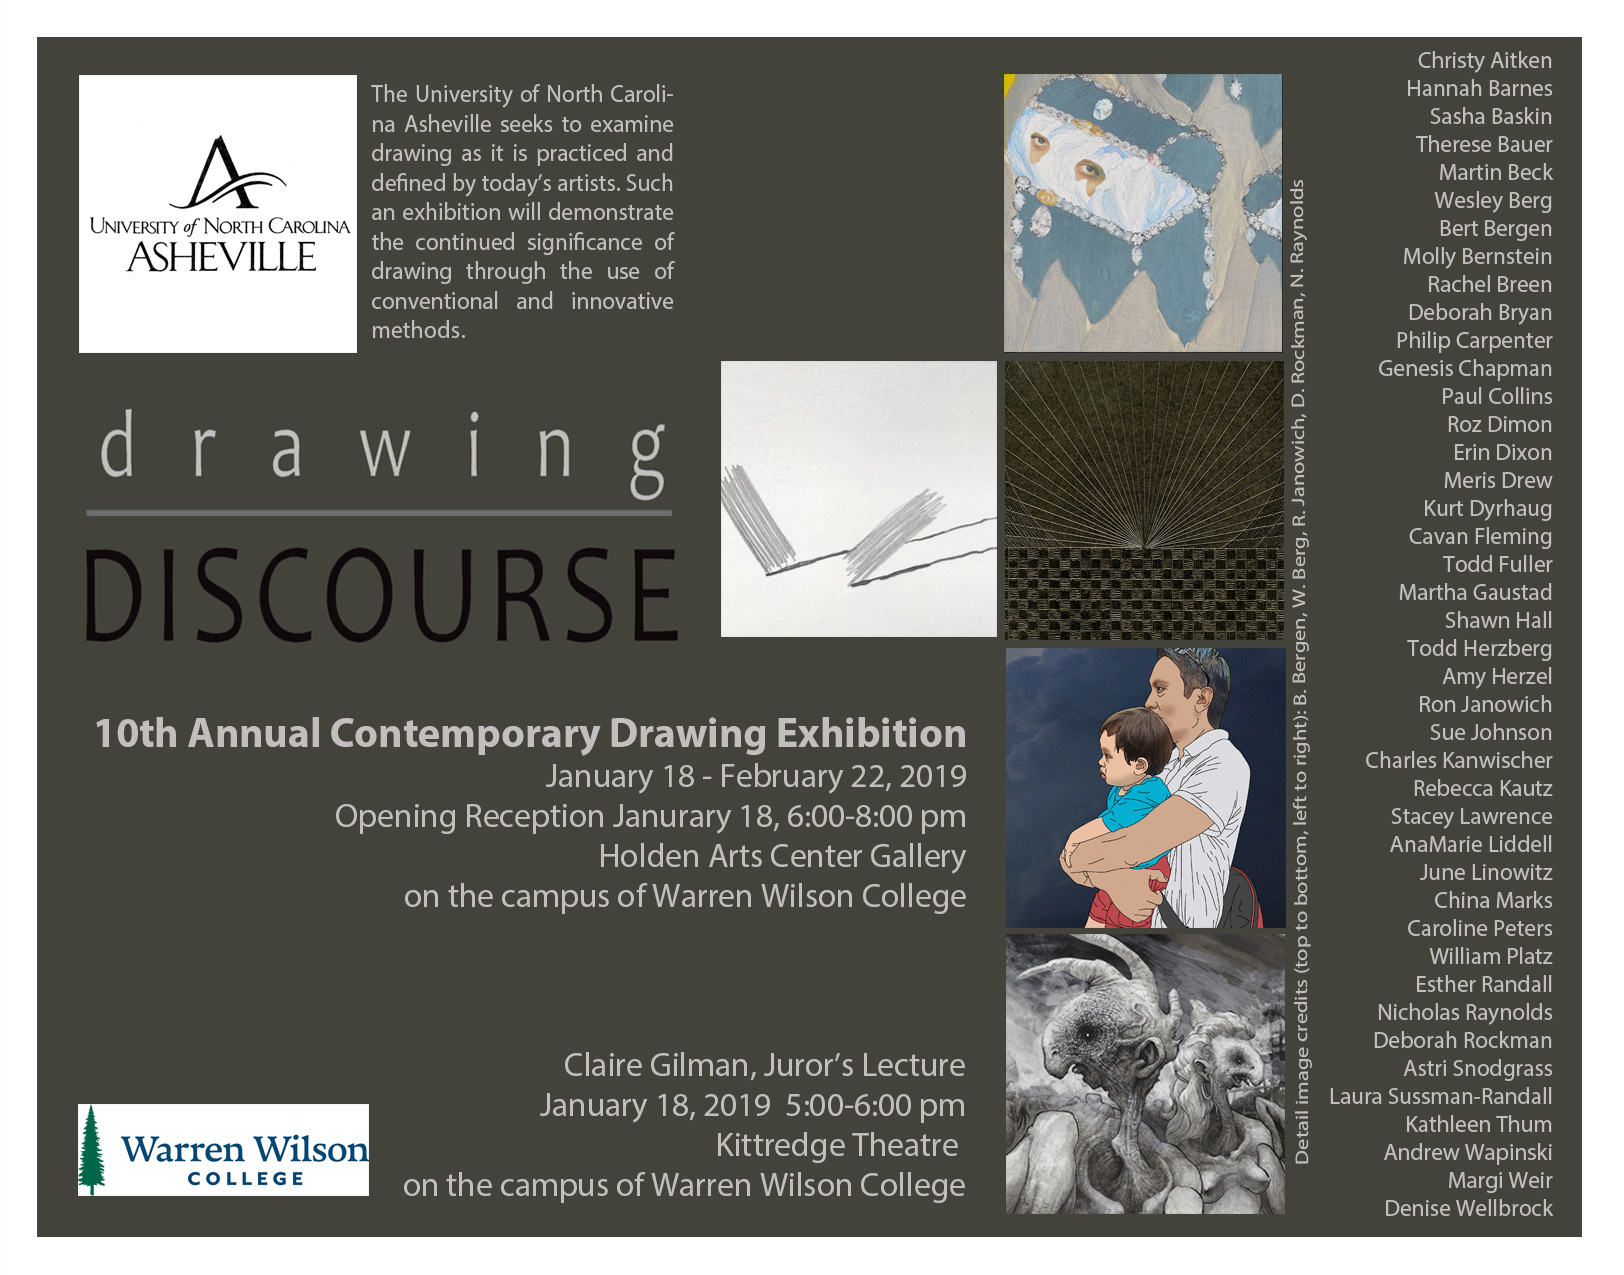 drawing discourse postcard